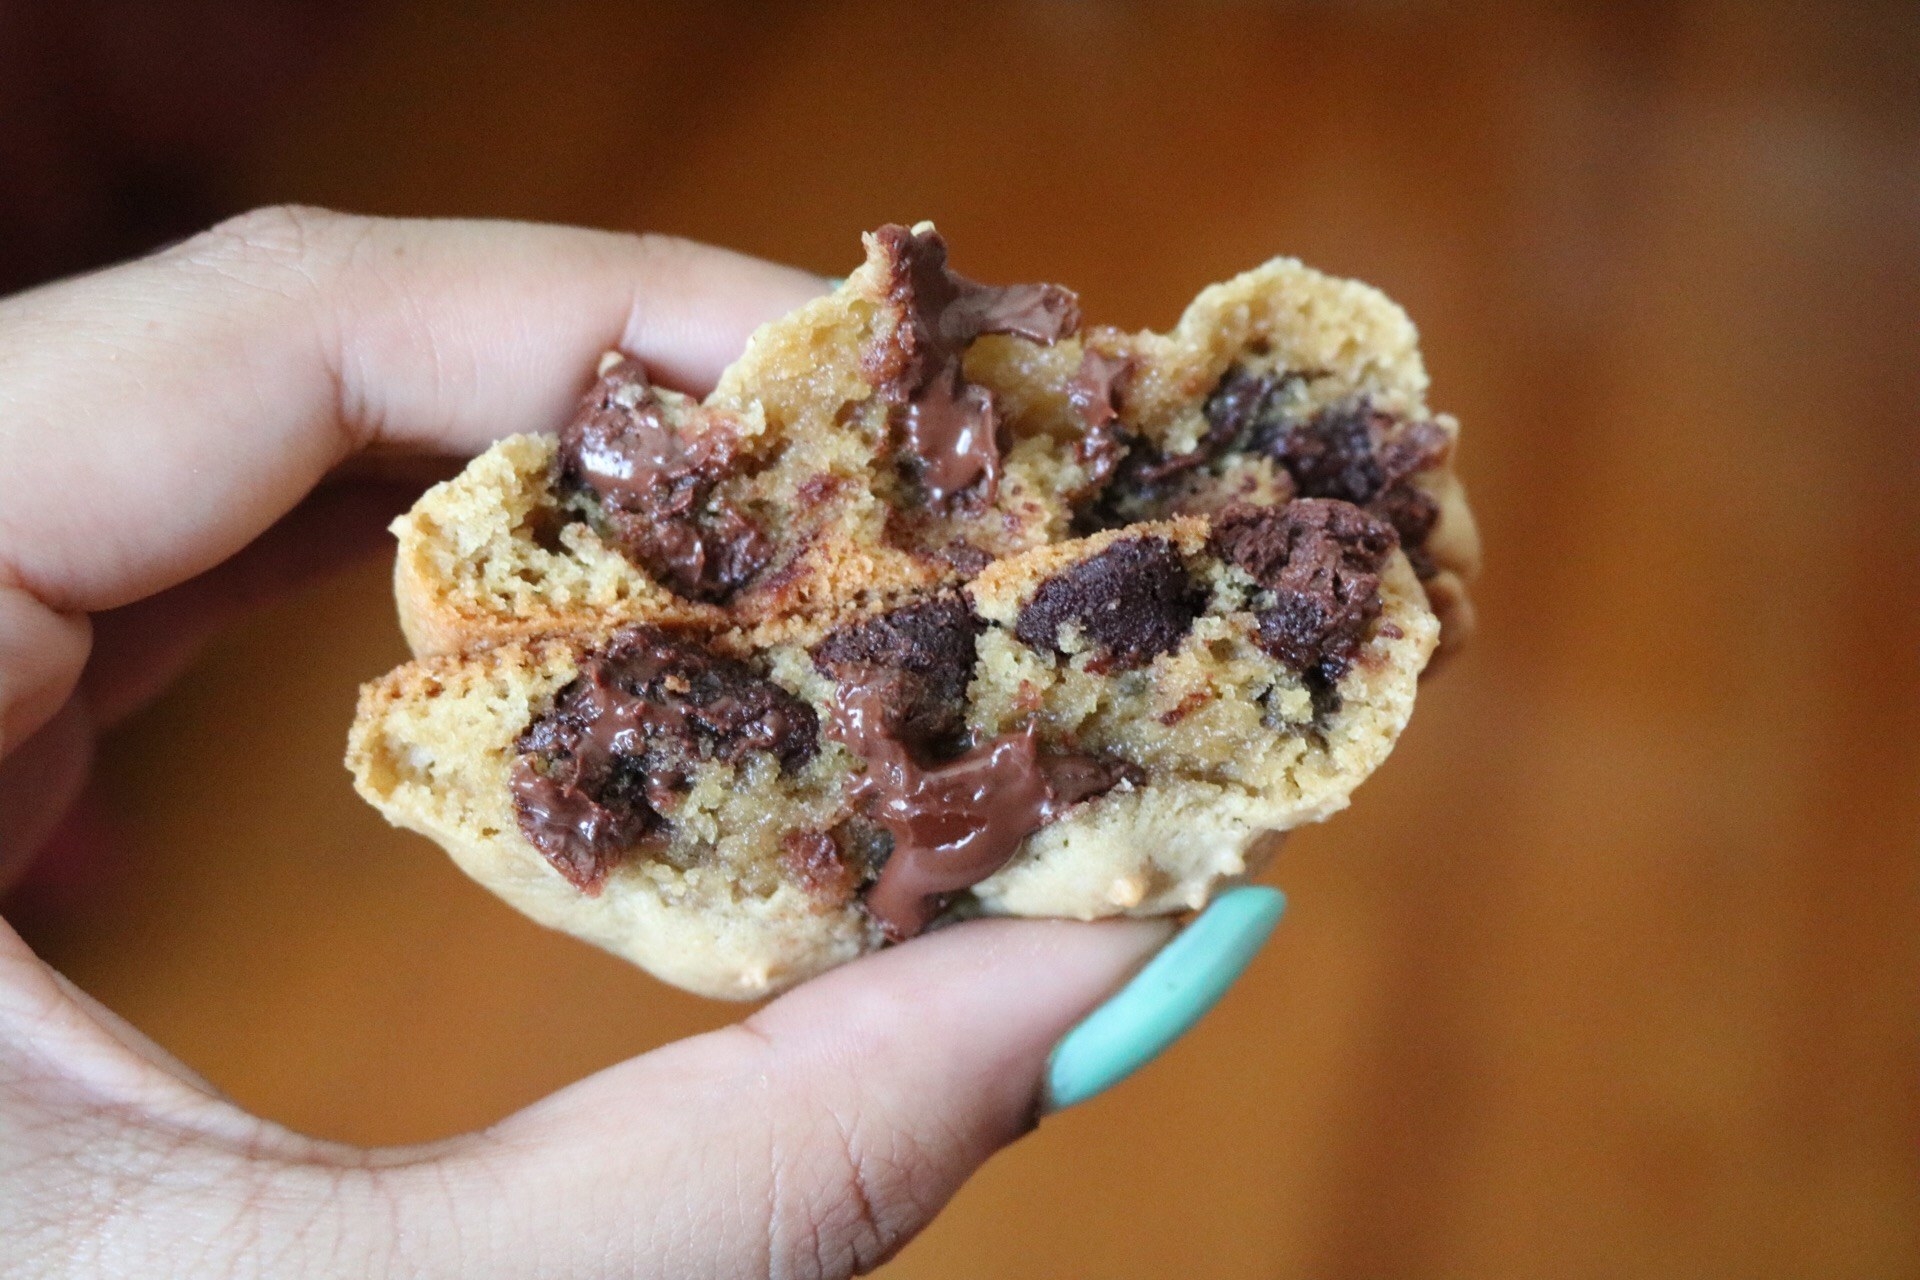 A close-up of a broken cookie with the halves stacked on top of one another to reveal the chocolate chips and the chewy texture